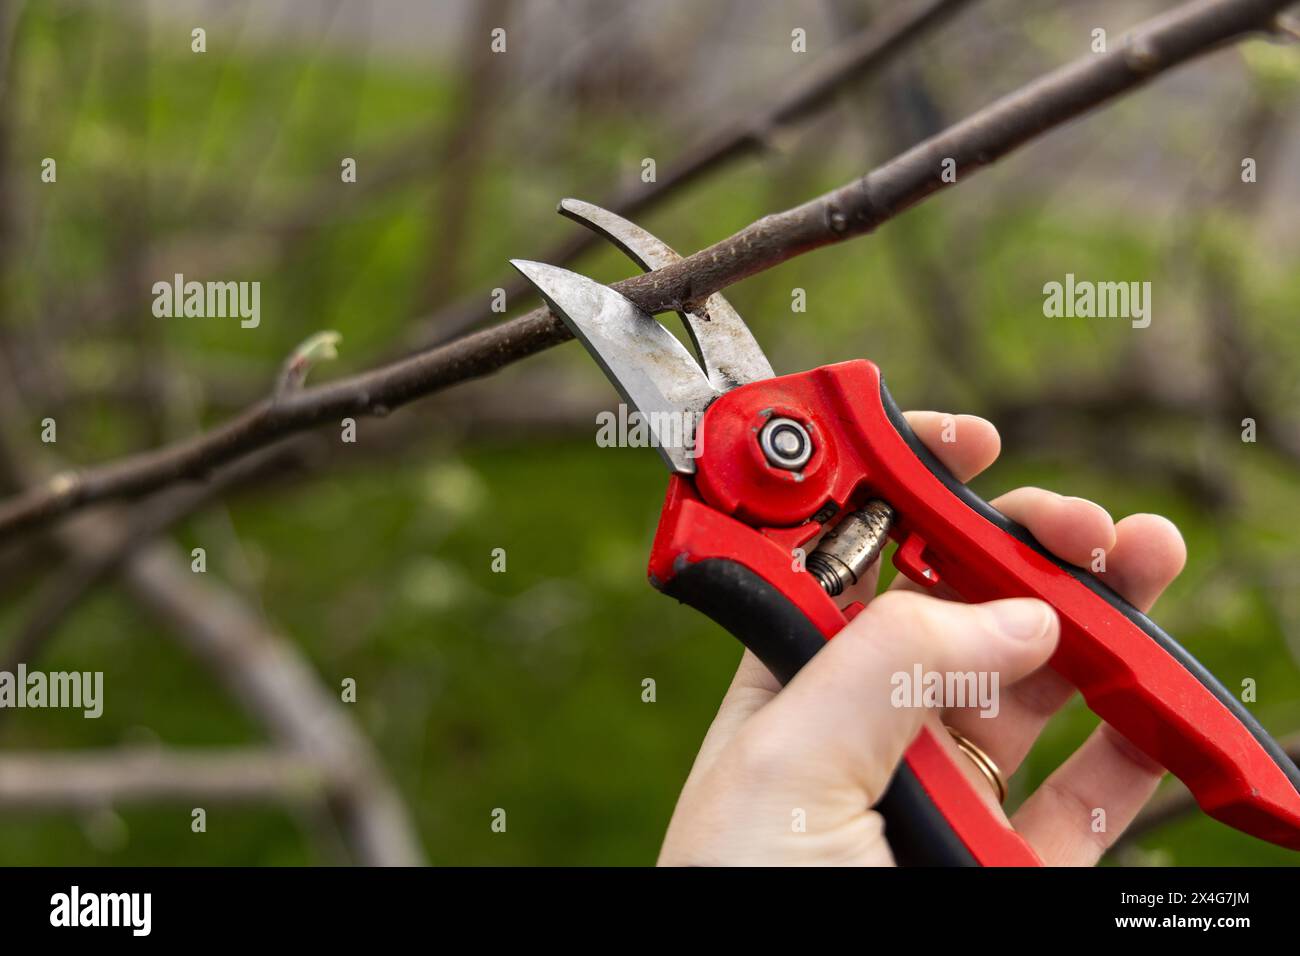 Pruning tree with red shears Stock Photo